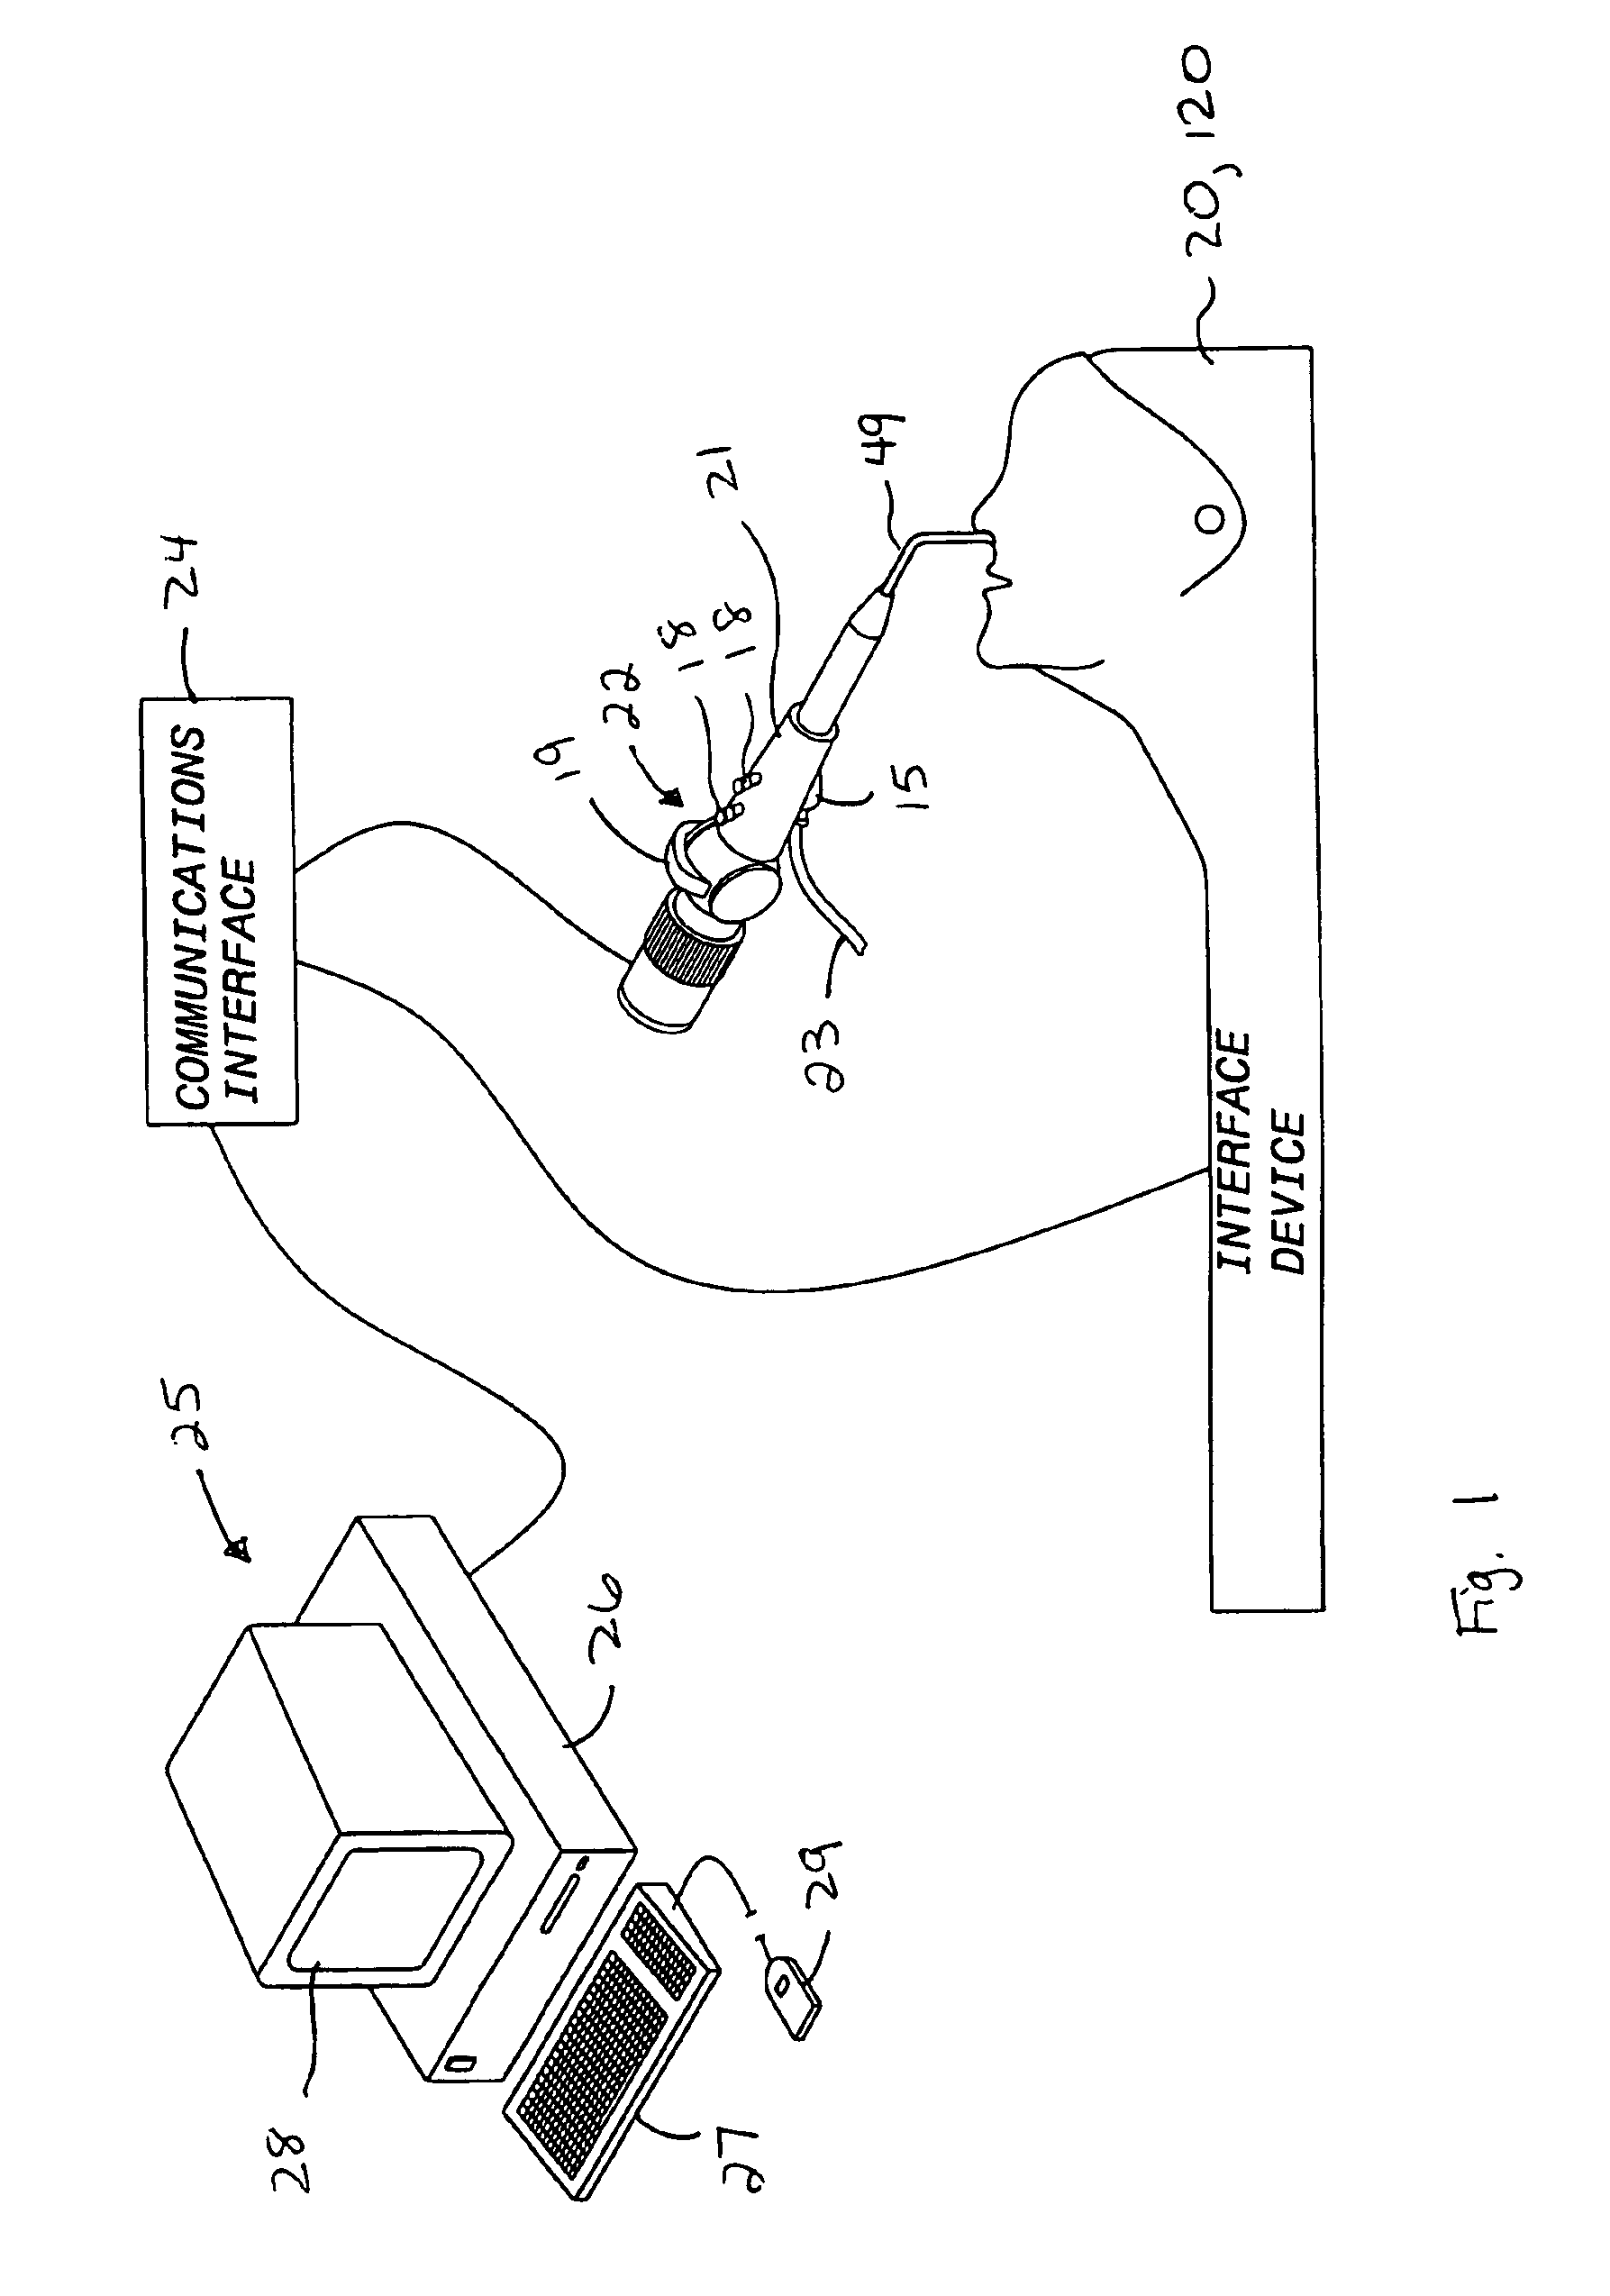 Interface device and method for interfacing instruments to medical procedure simulation systems